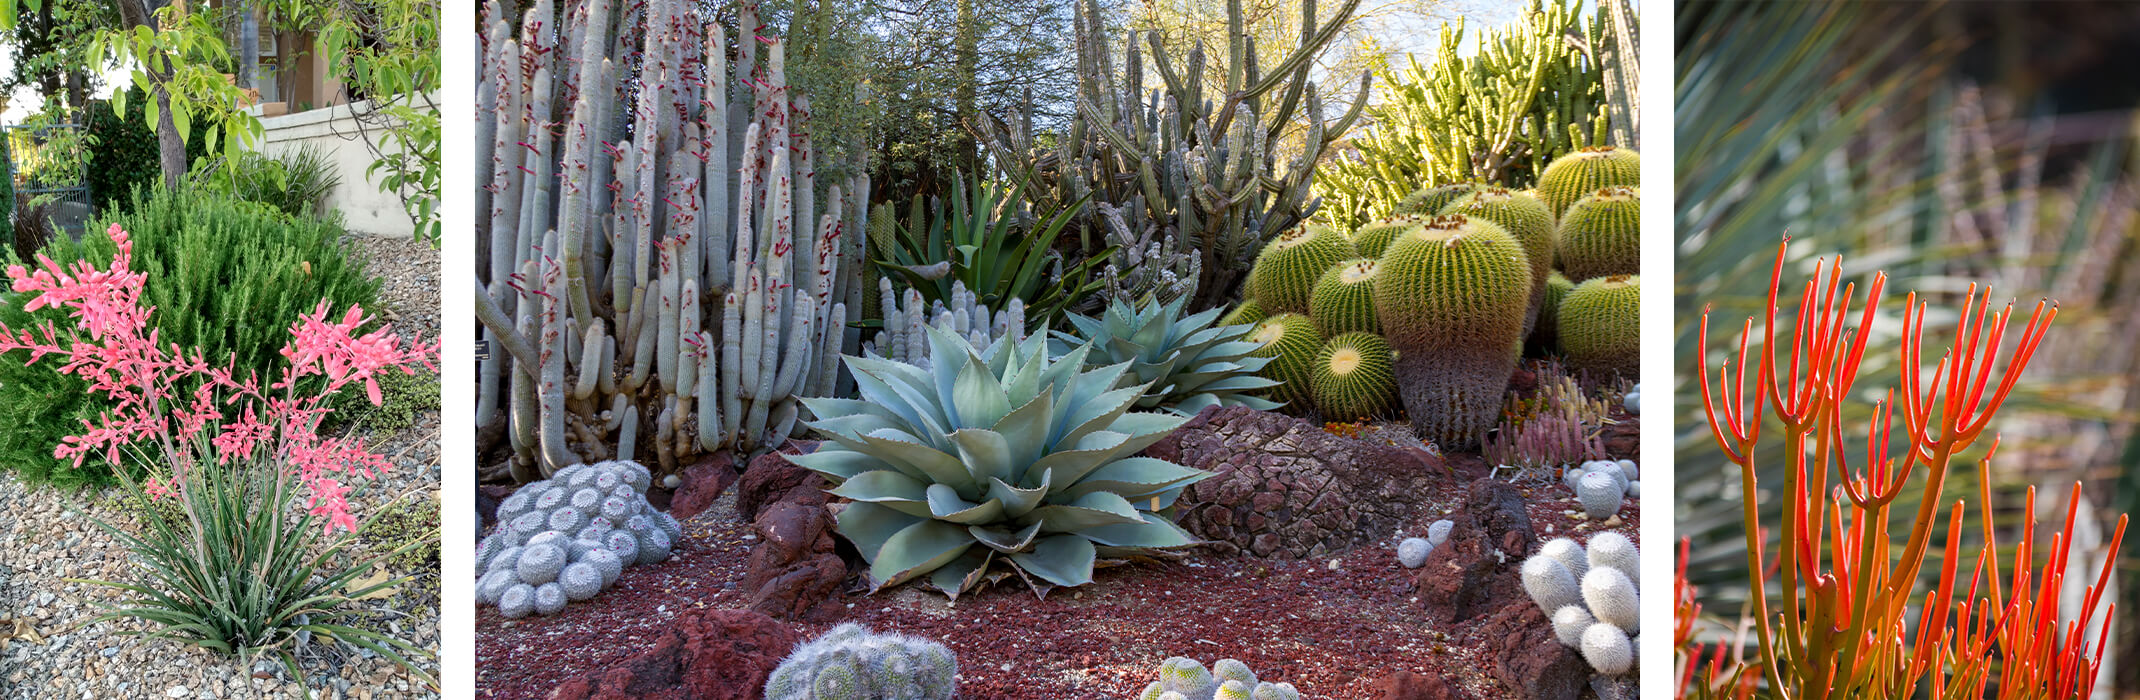 3 images: Red Yucca, a variety of cacti and succulents, and fire stick cactus